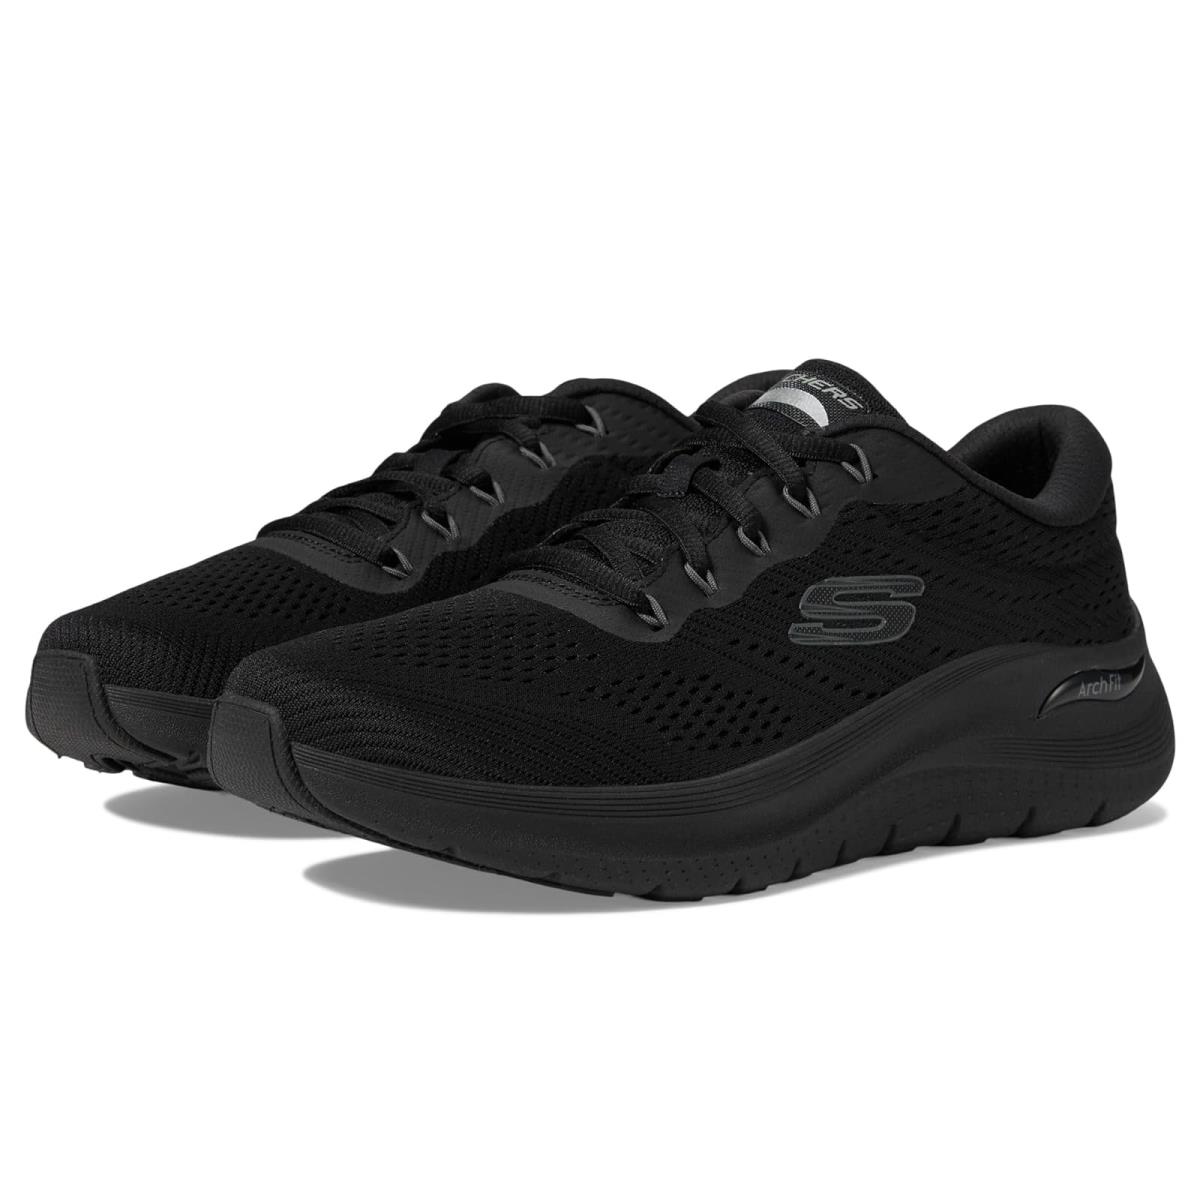 Man`s Sneakers Athletic Shoes Skechers Arch Fit 2.0 Black/Black